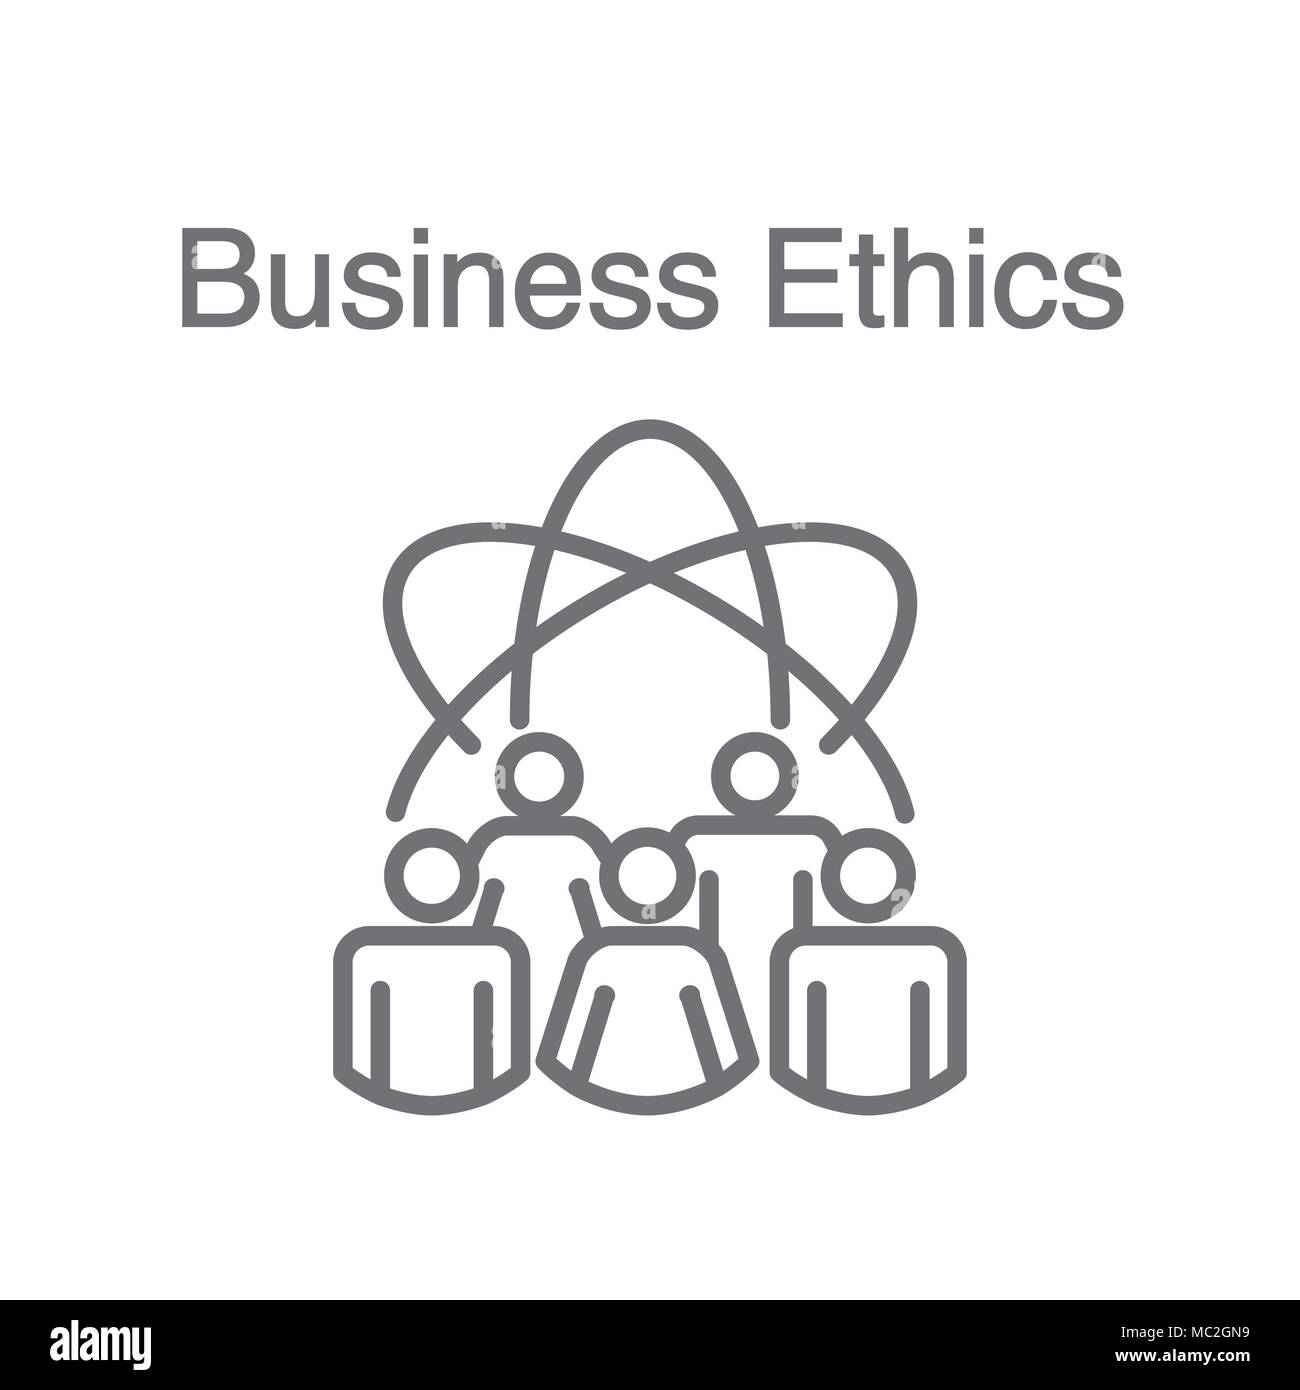 Business Ethics Solid Icon w people sharing ideas. Stock Vector